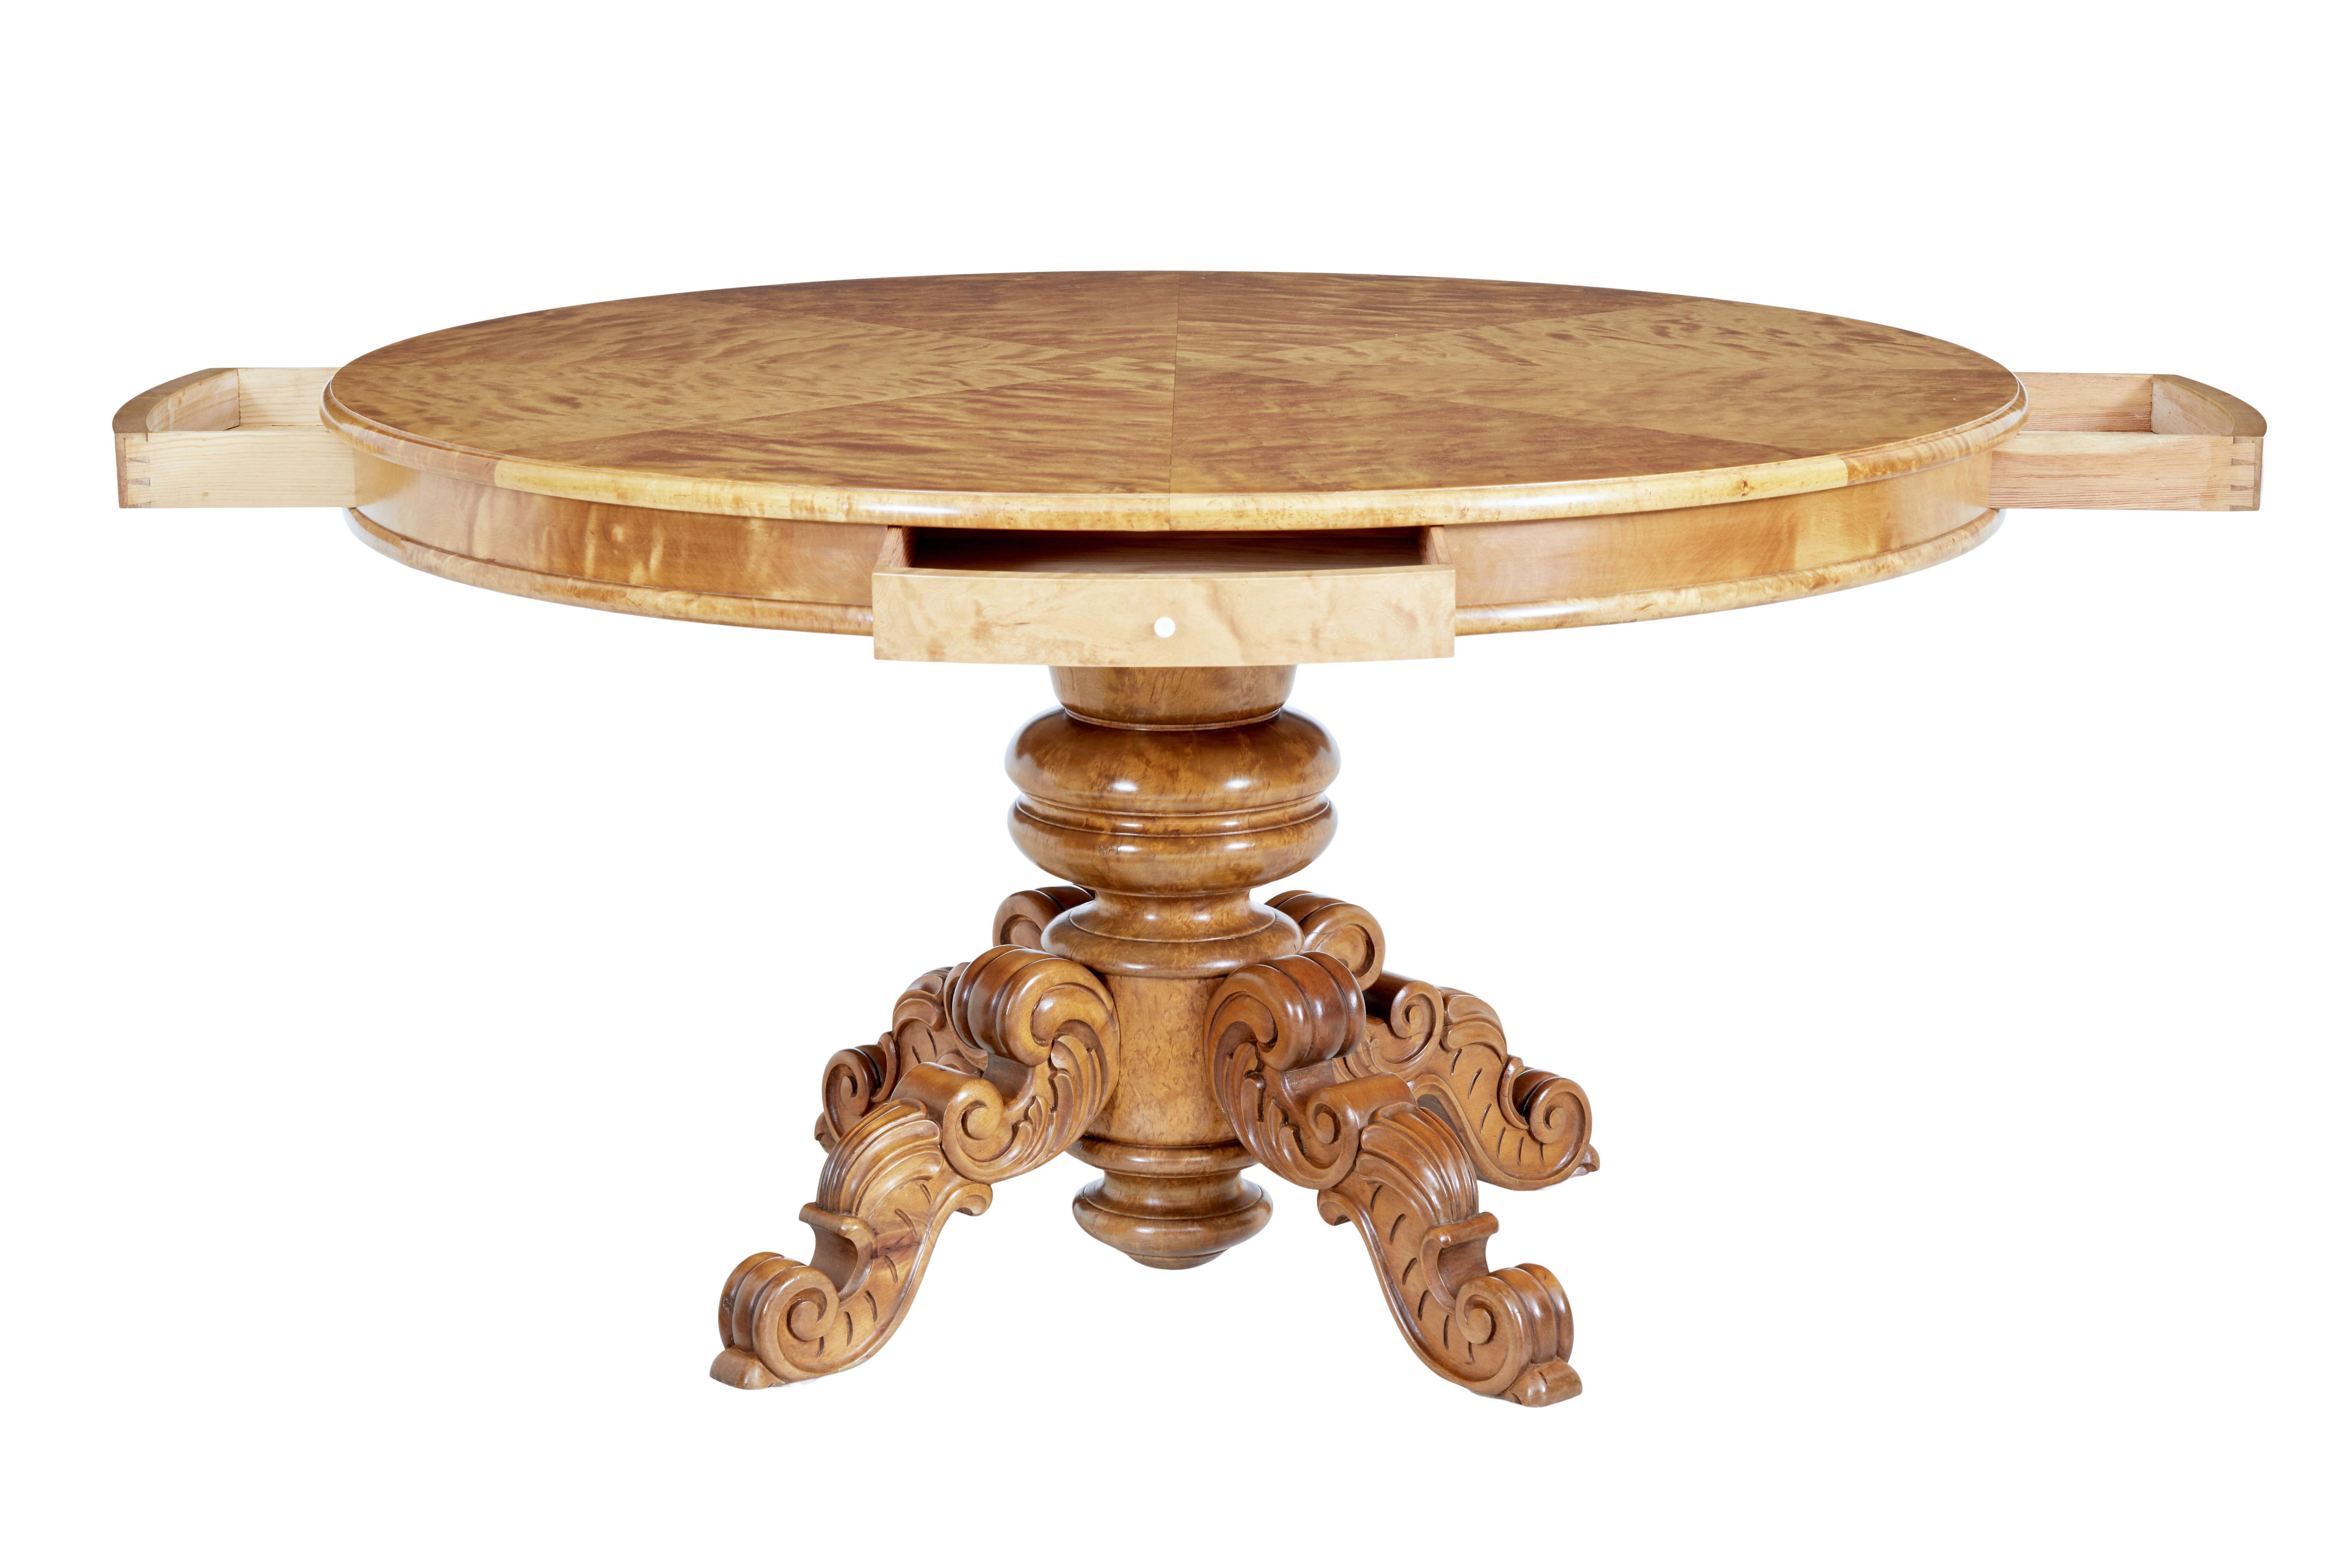 19th century birch Swedish carved drum centre table, circa 1890.

Know as a drum table but this table would function well as a dining table.

Large circular center table, with 4 shallow drawers placed at equal positions around the edge. Top